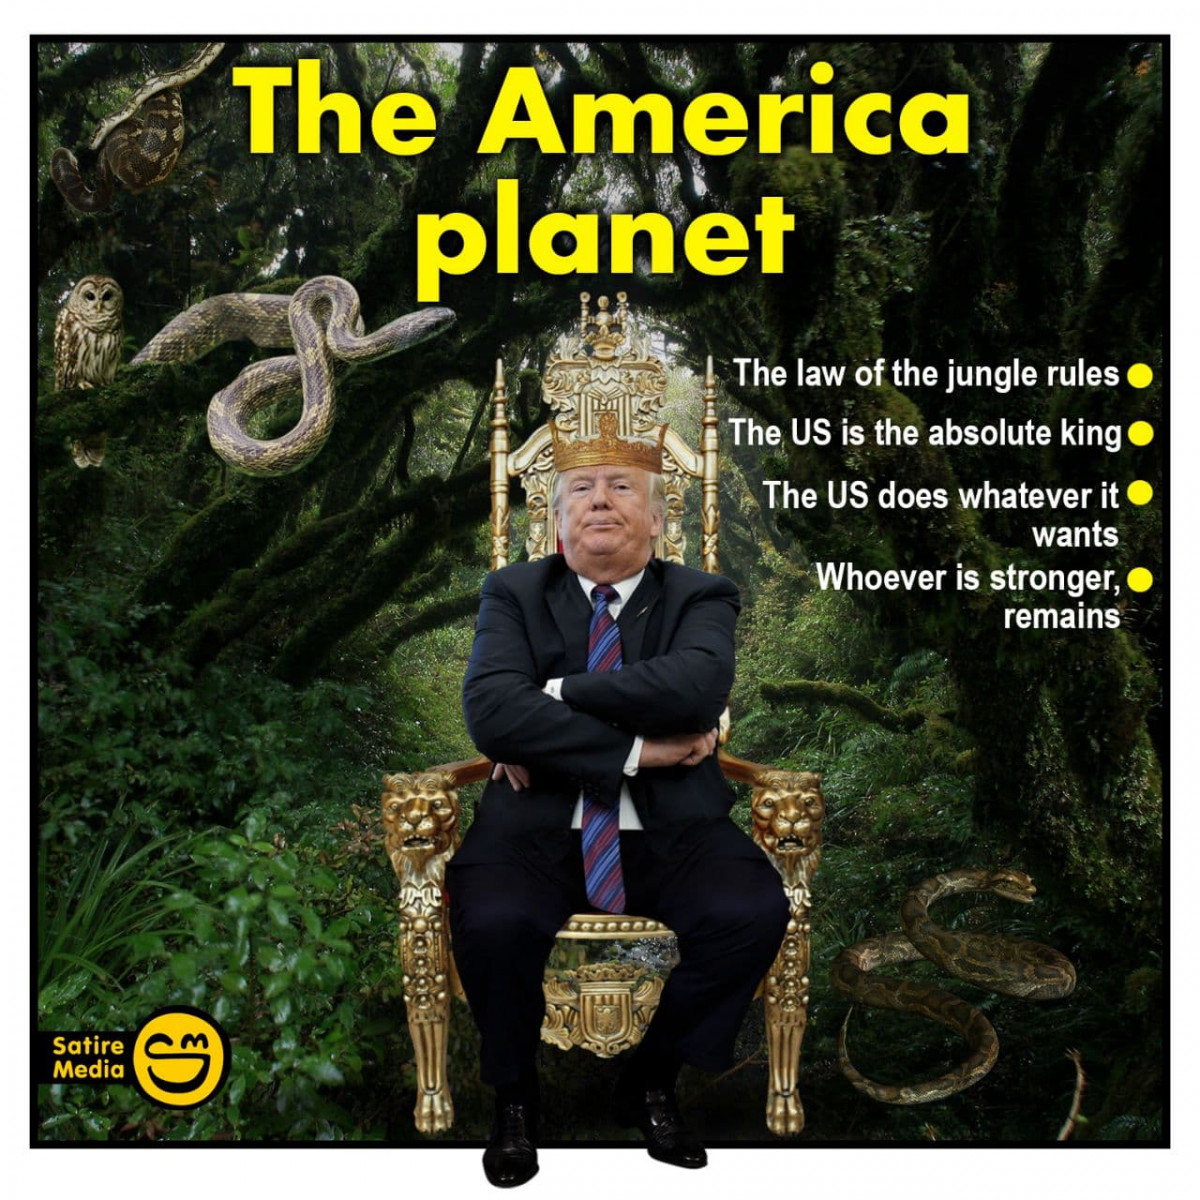 The America planet